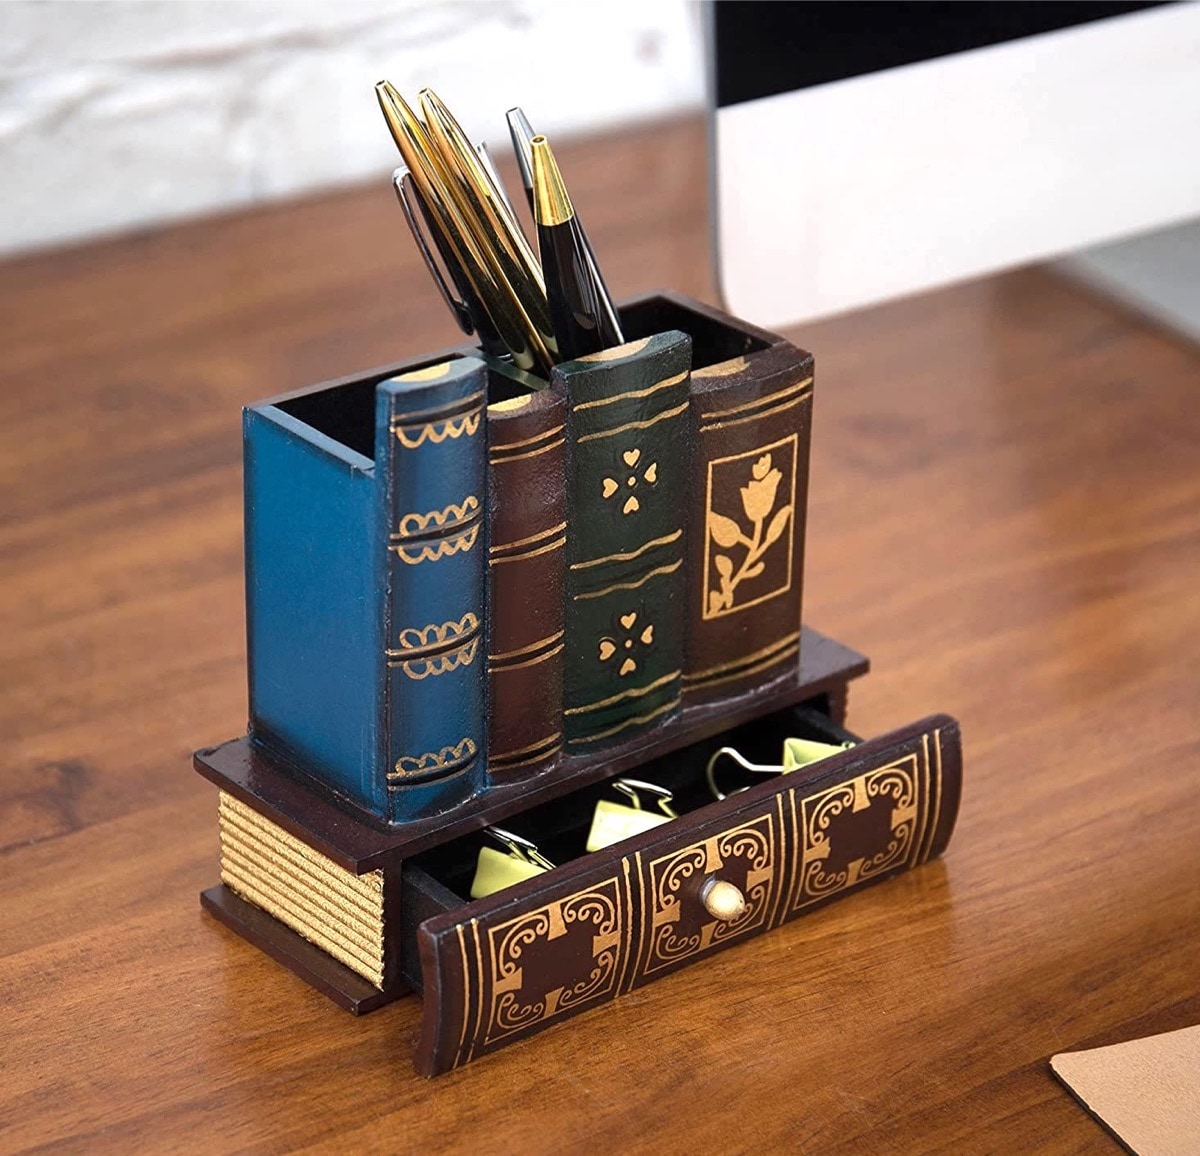 Bookish home decoration not only for Christmas